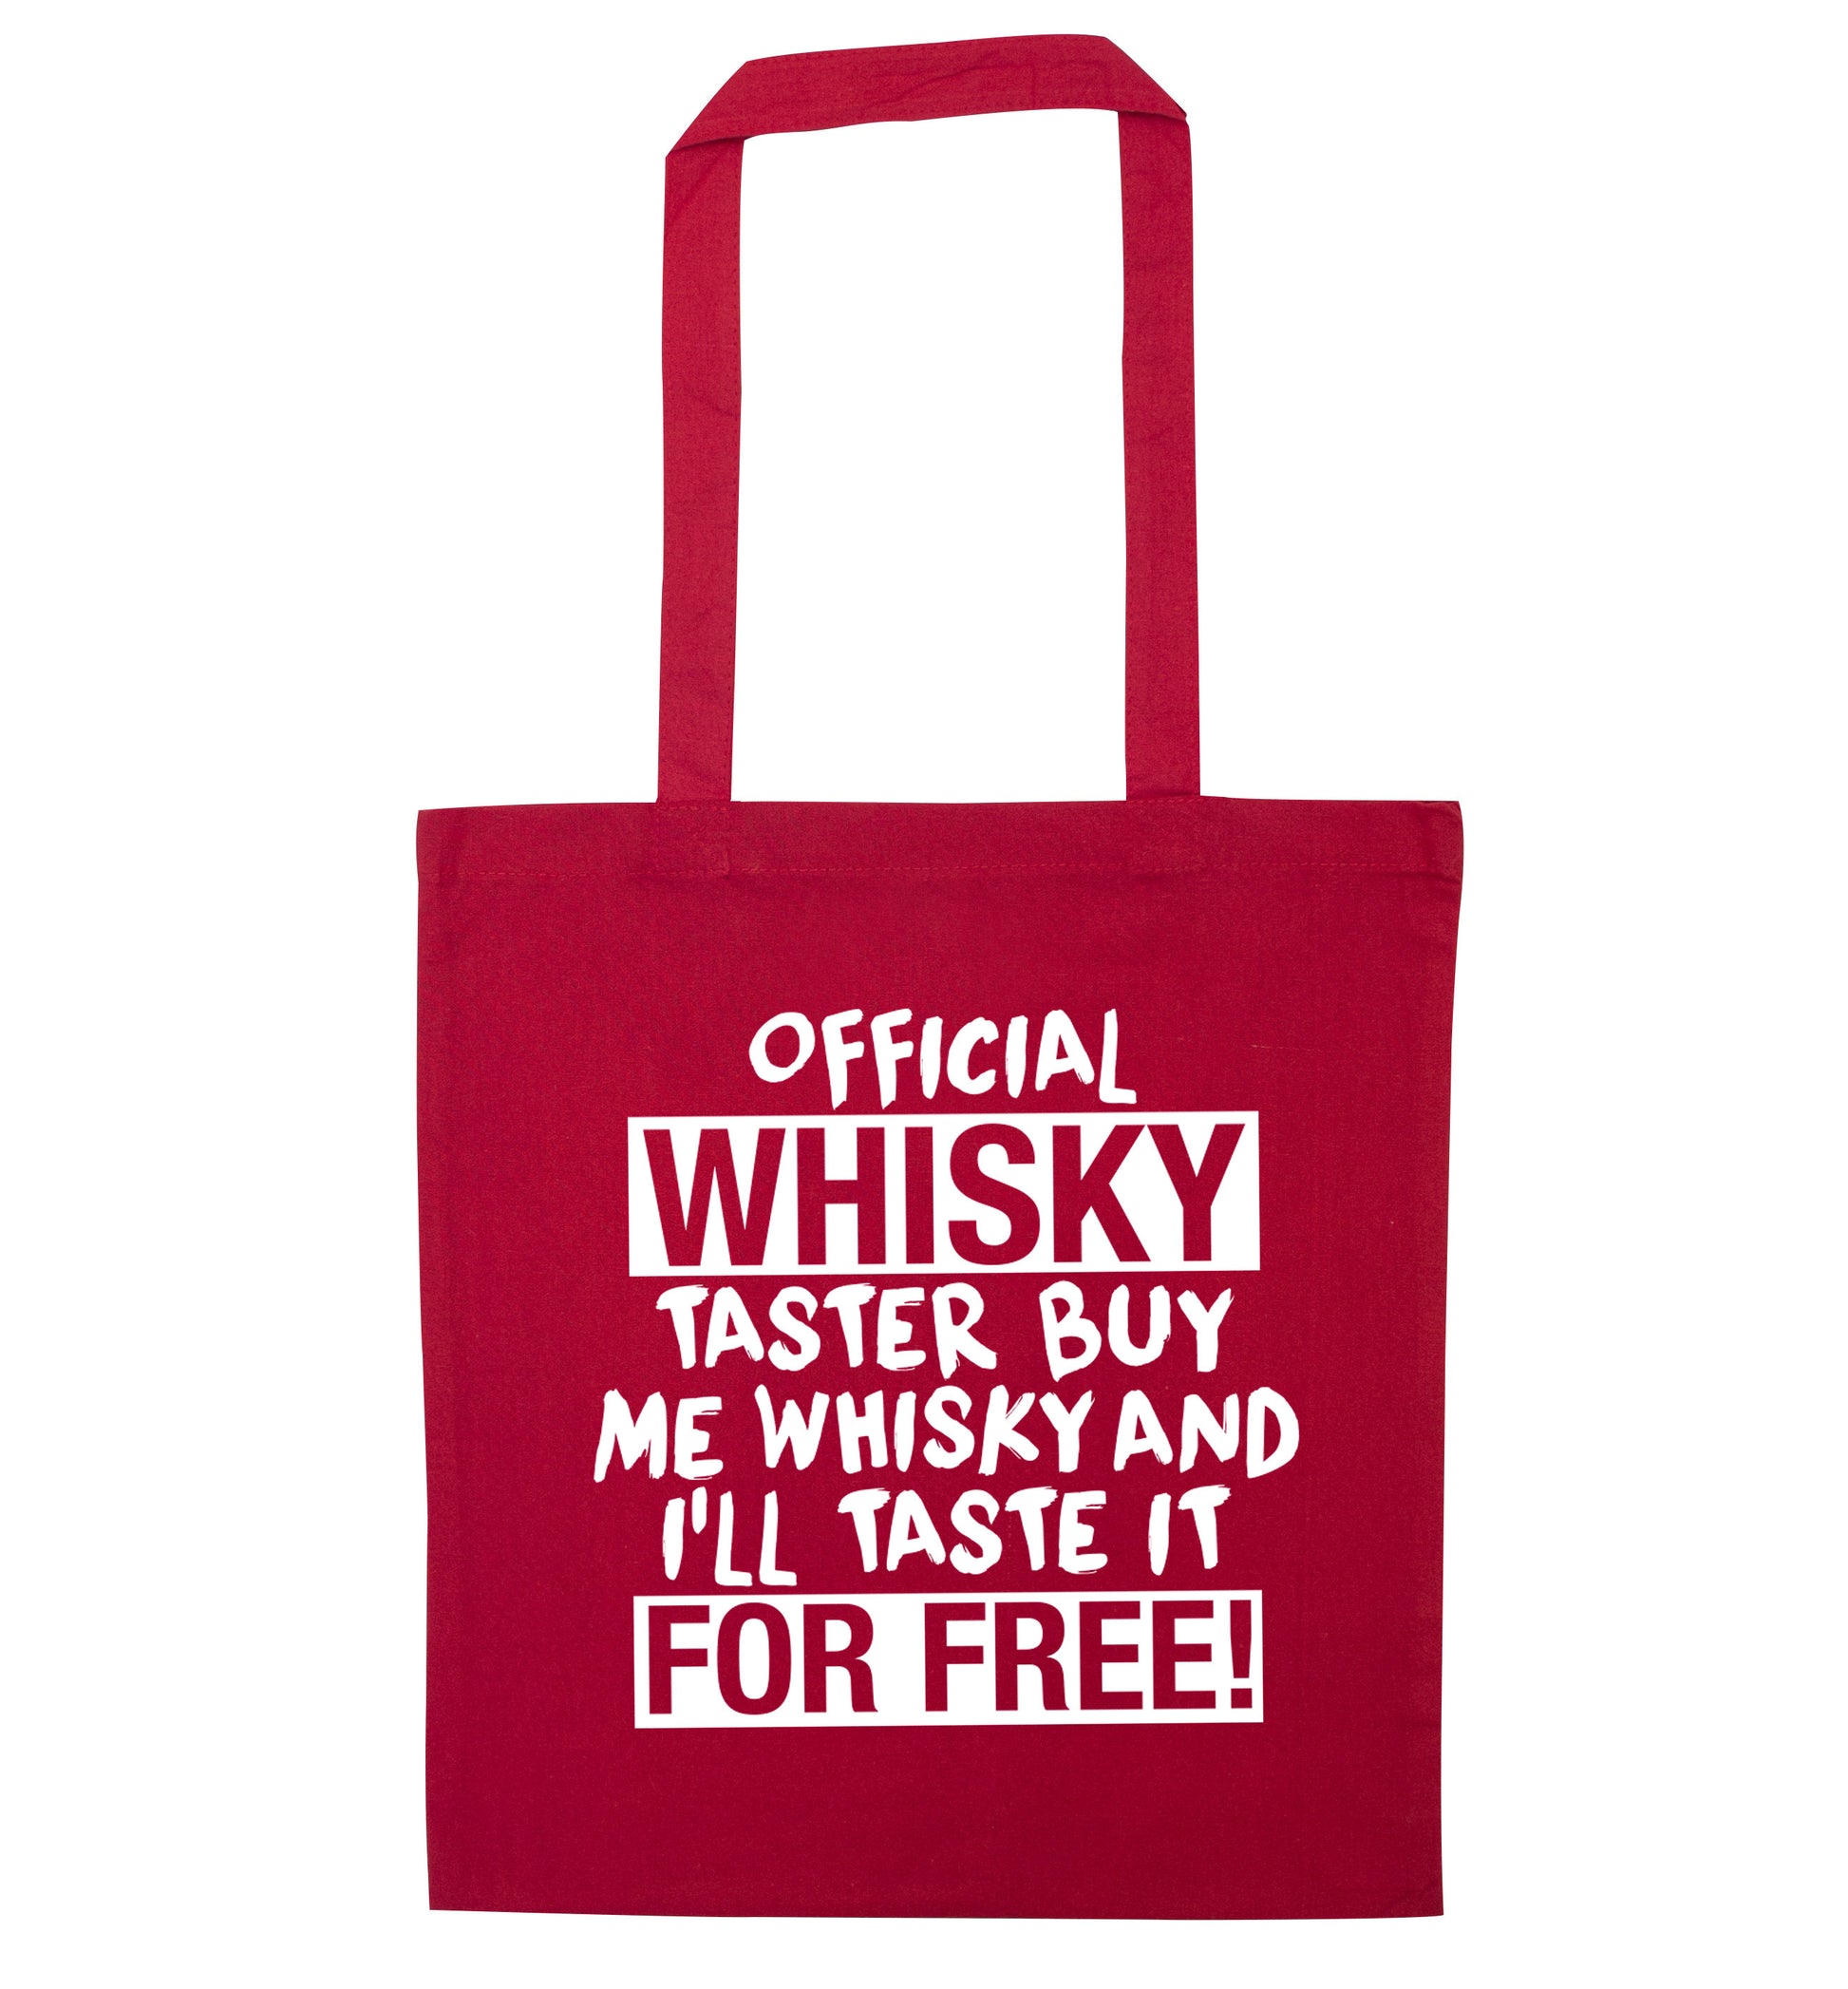 Official whisky taster buy me whisky and I'll taste it for free red tote bag